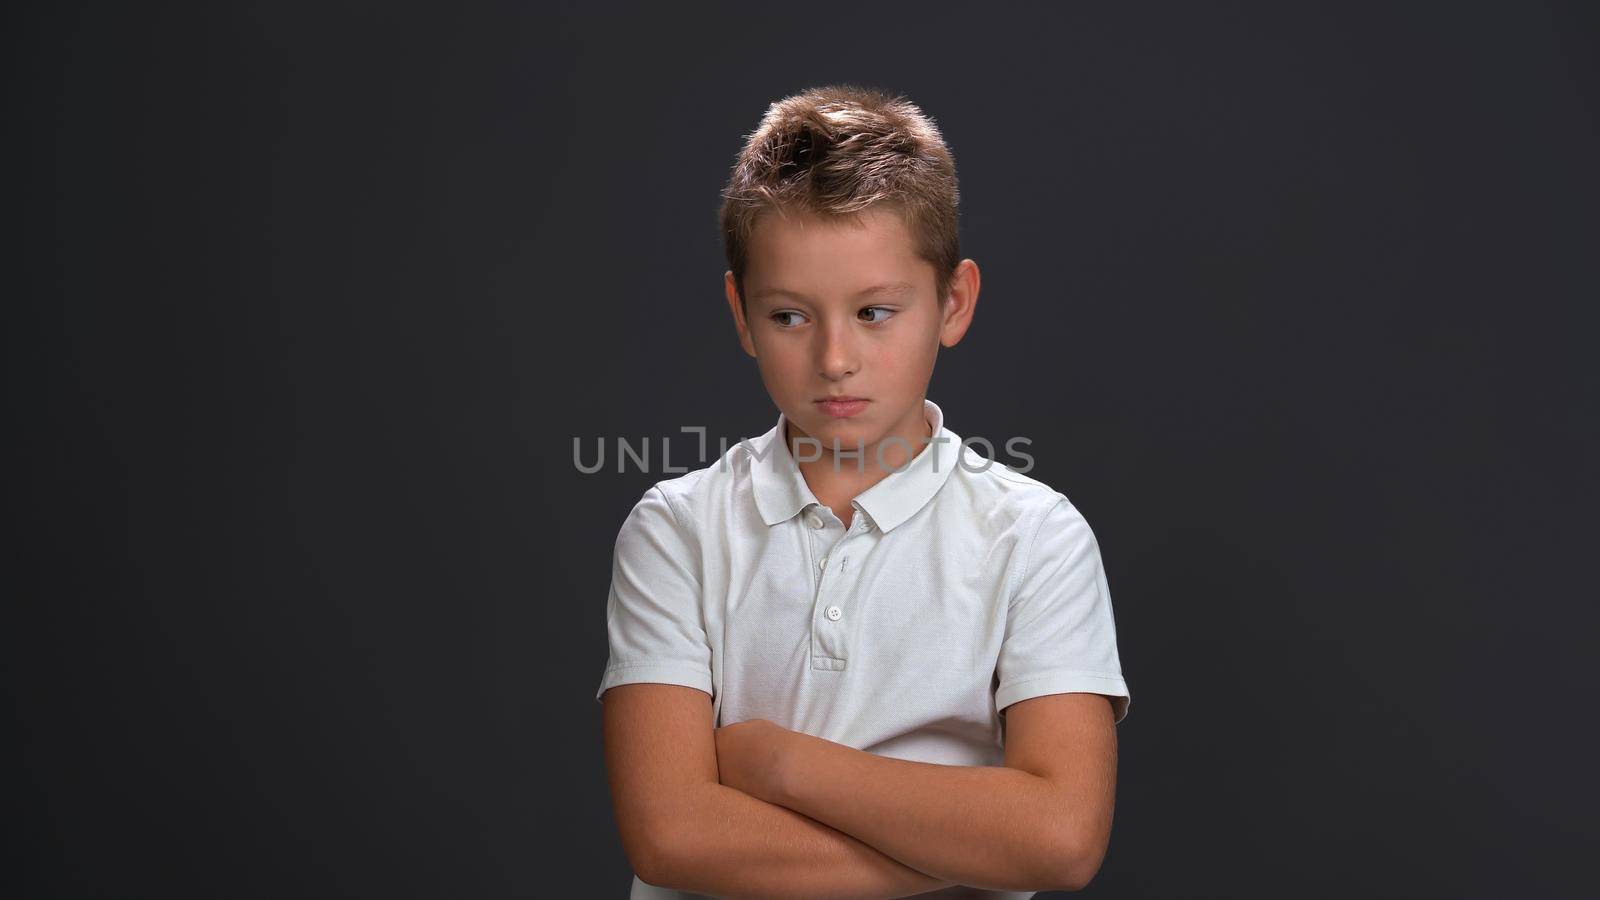 Unhappy or sad little boy looking a side frowning wearing white polo shirt and black pants isolated on black background by LipikStockMedia